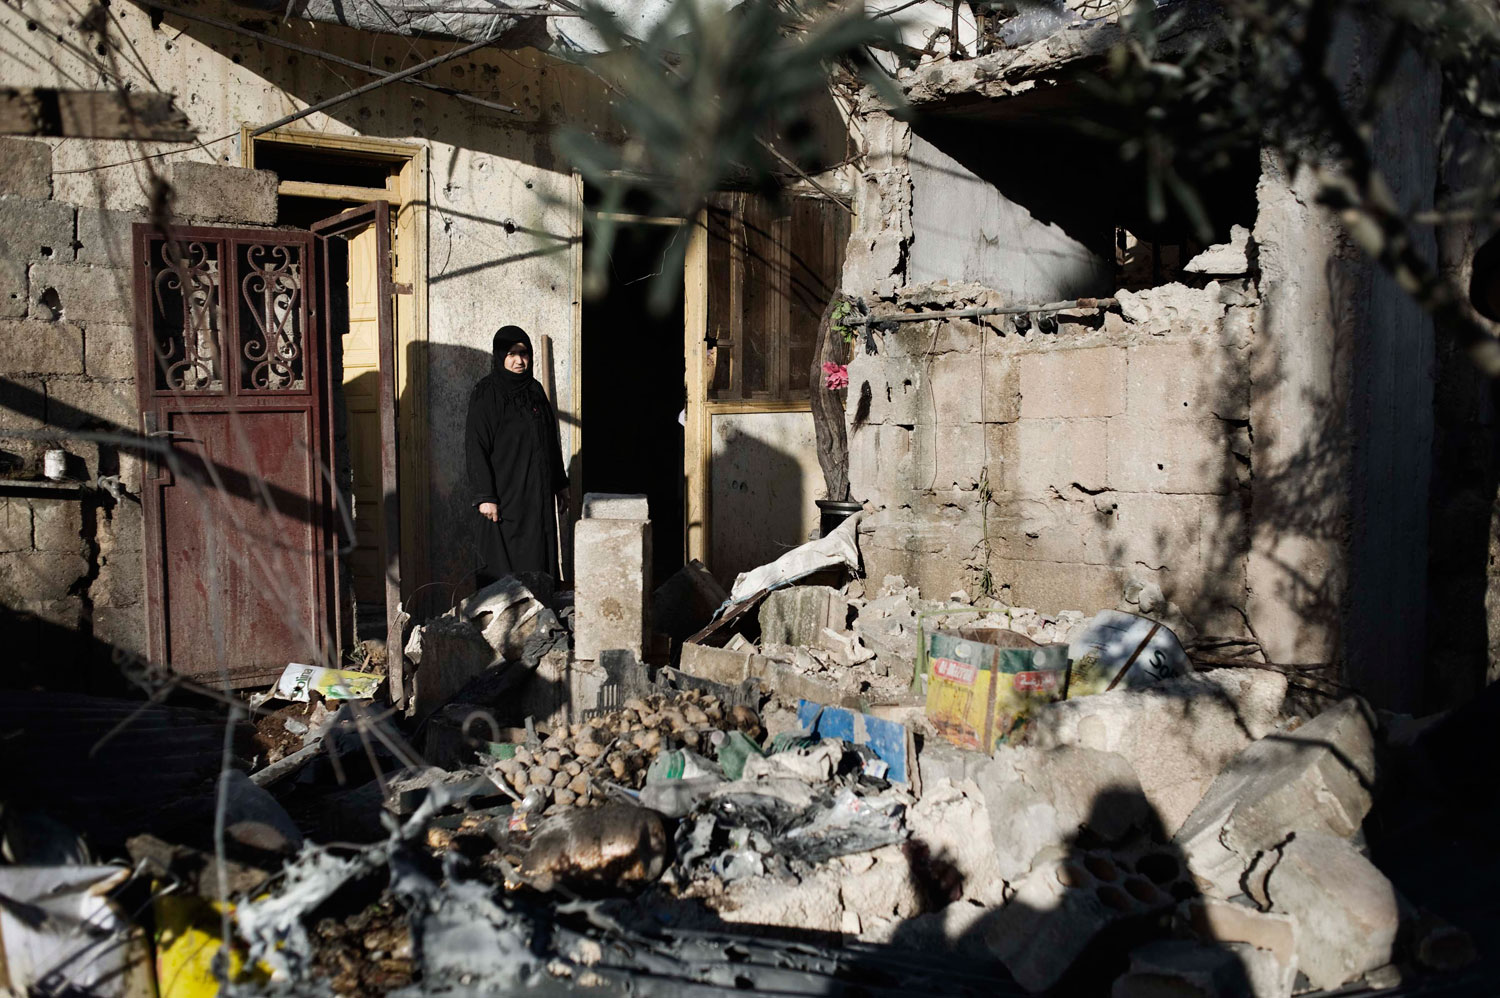 Feb. 9, 2012. A Syrian woman stands among the rubble of her house, destroyed by a Syrian Army mortar, in al-Qsair.